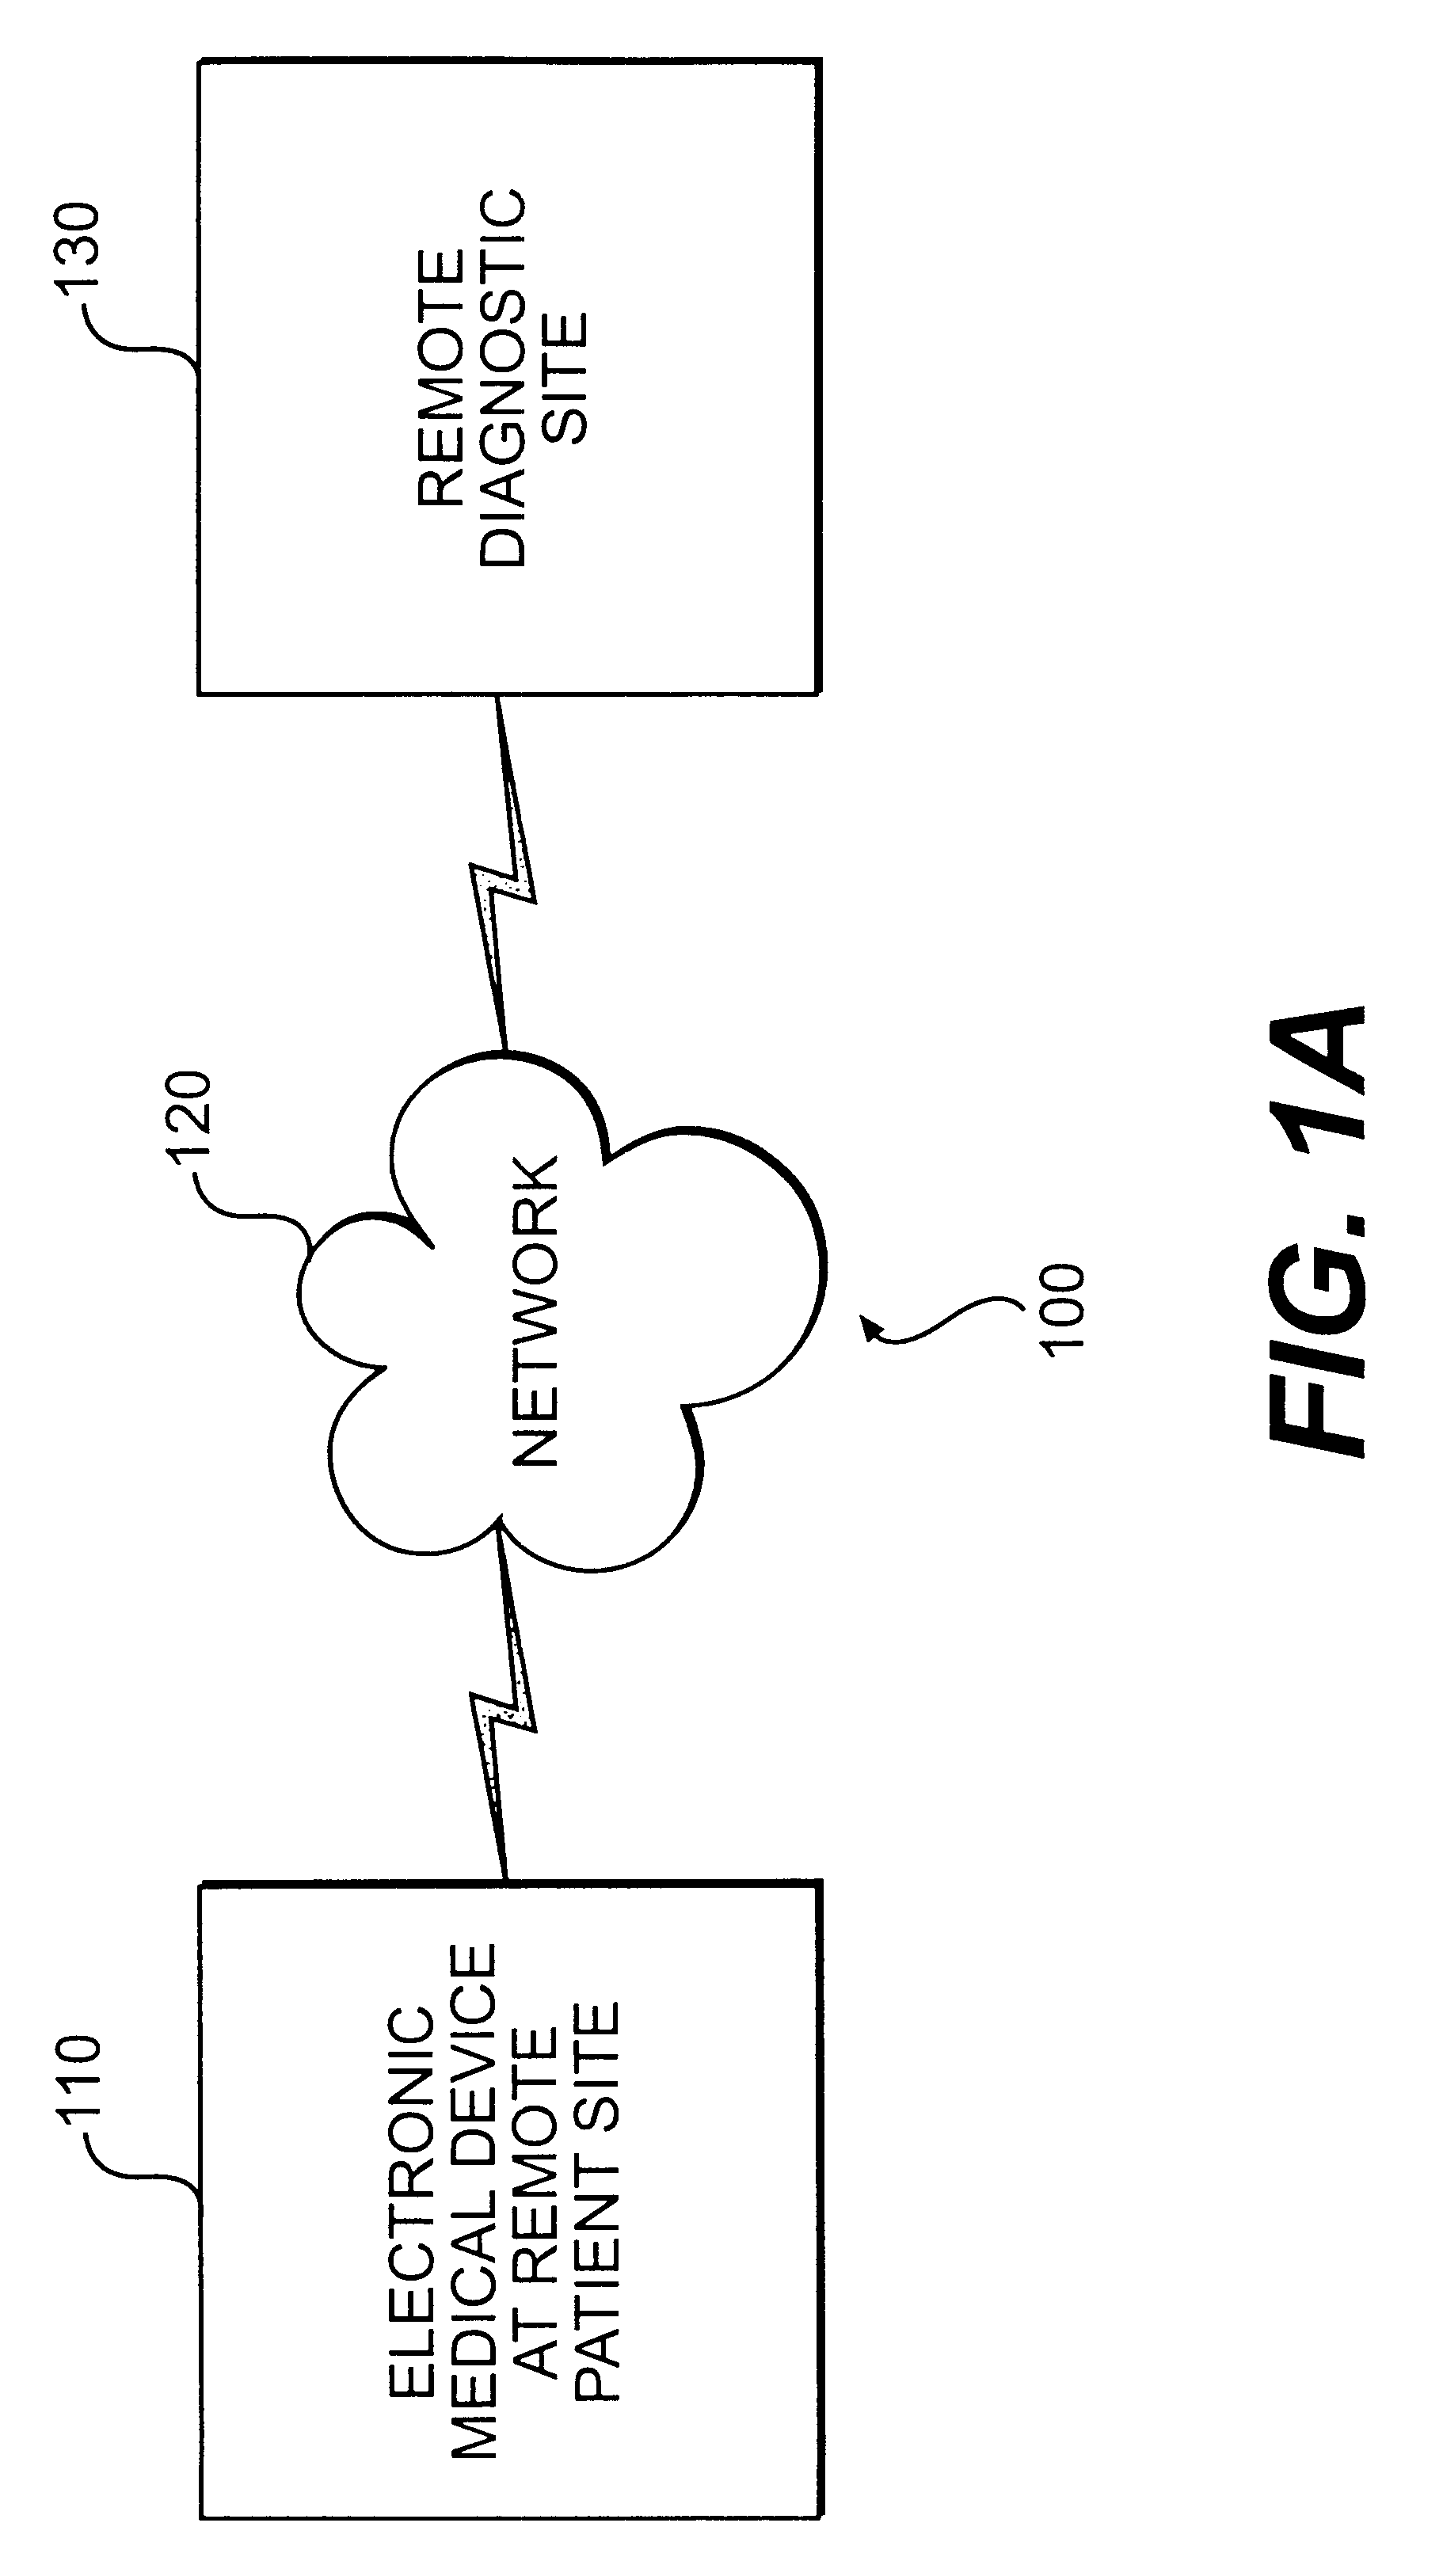 Methods and apparatus for processing, transmitting, and receiving data from a modular electronic medical device